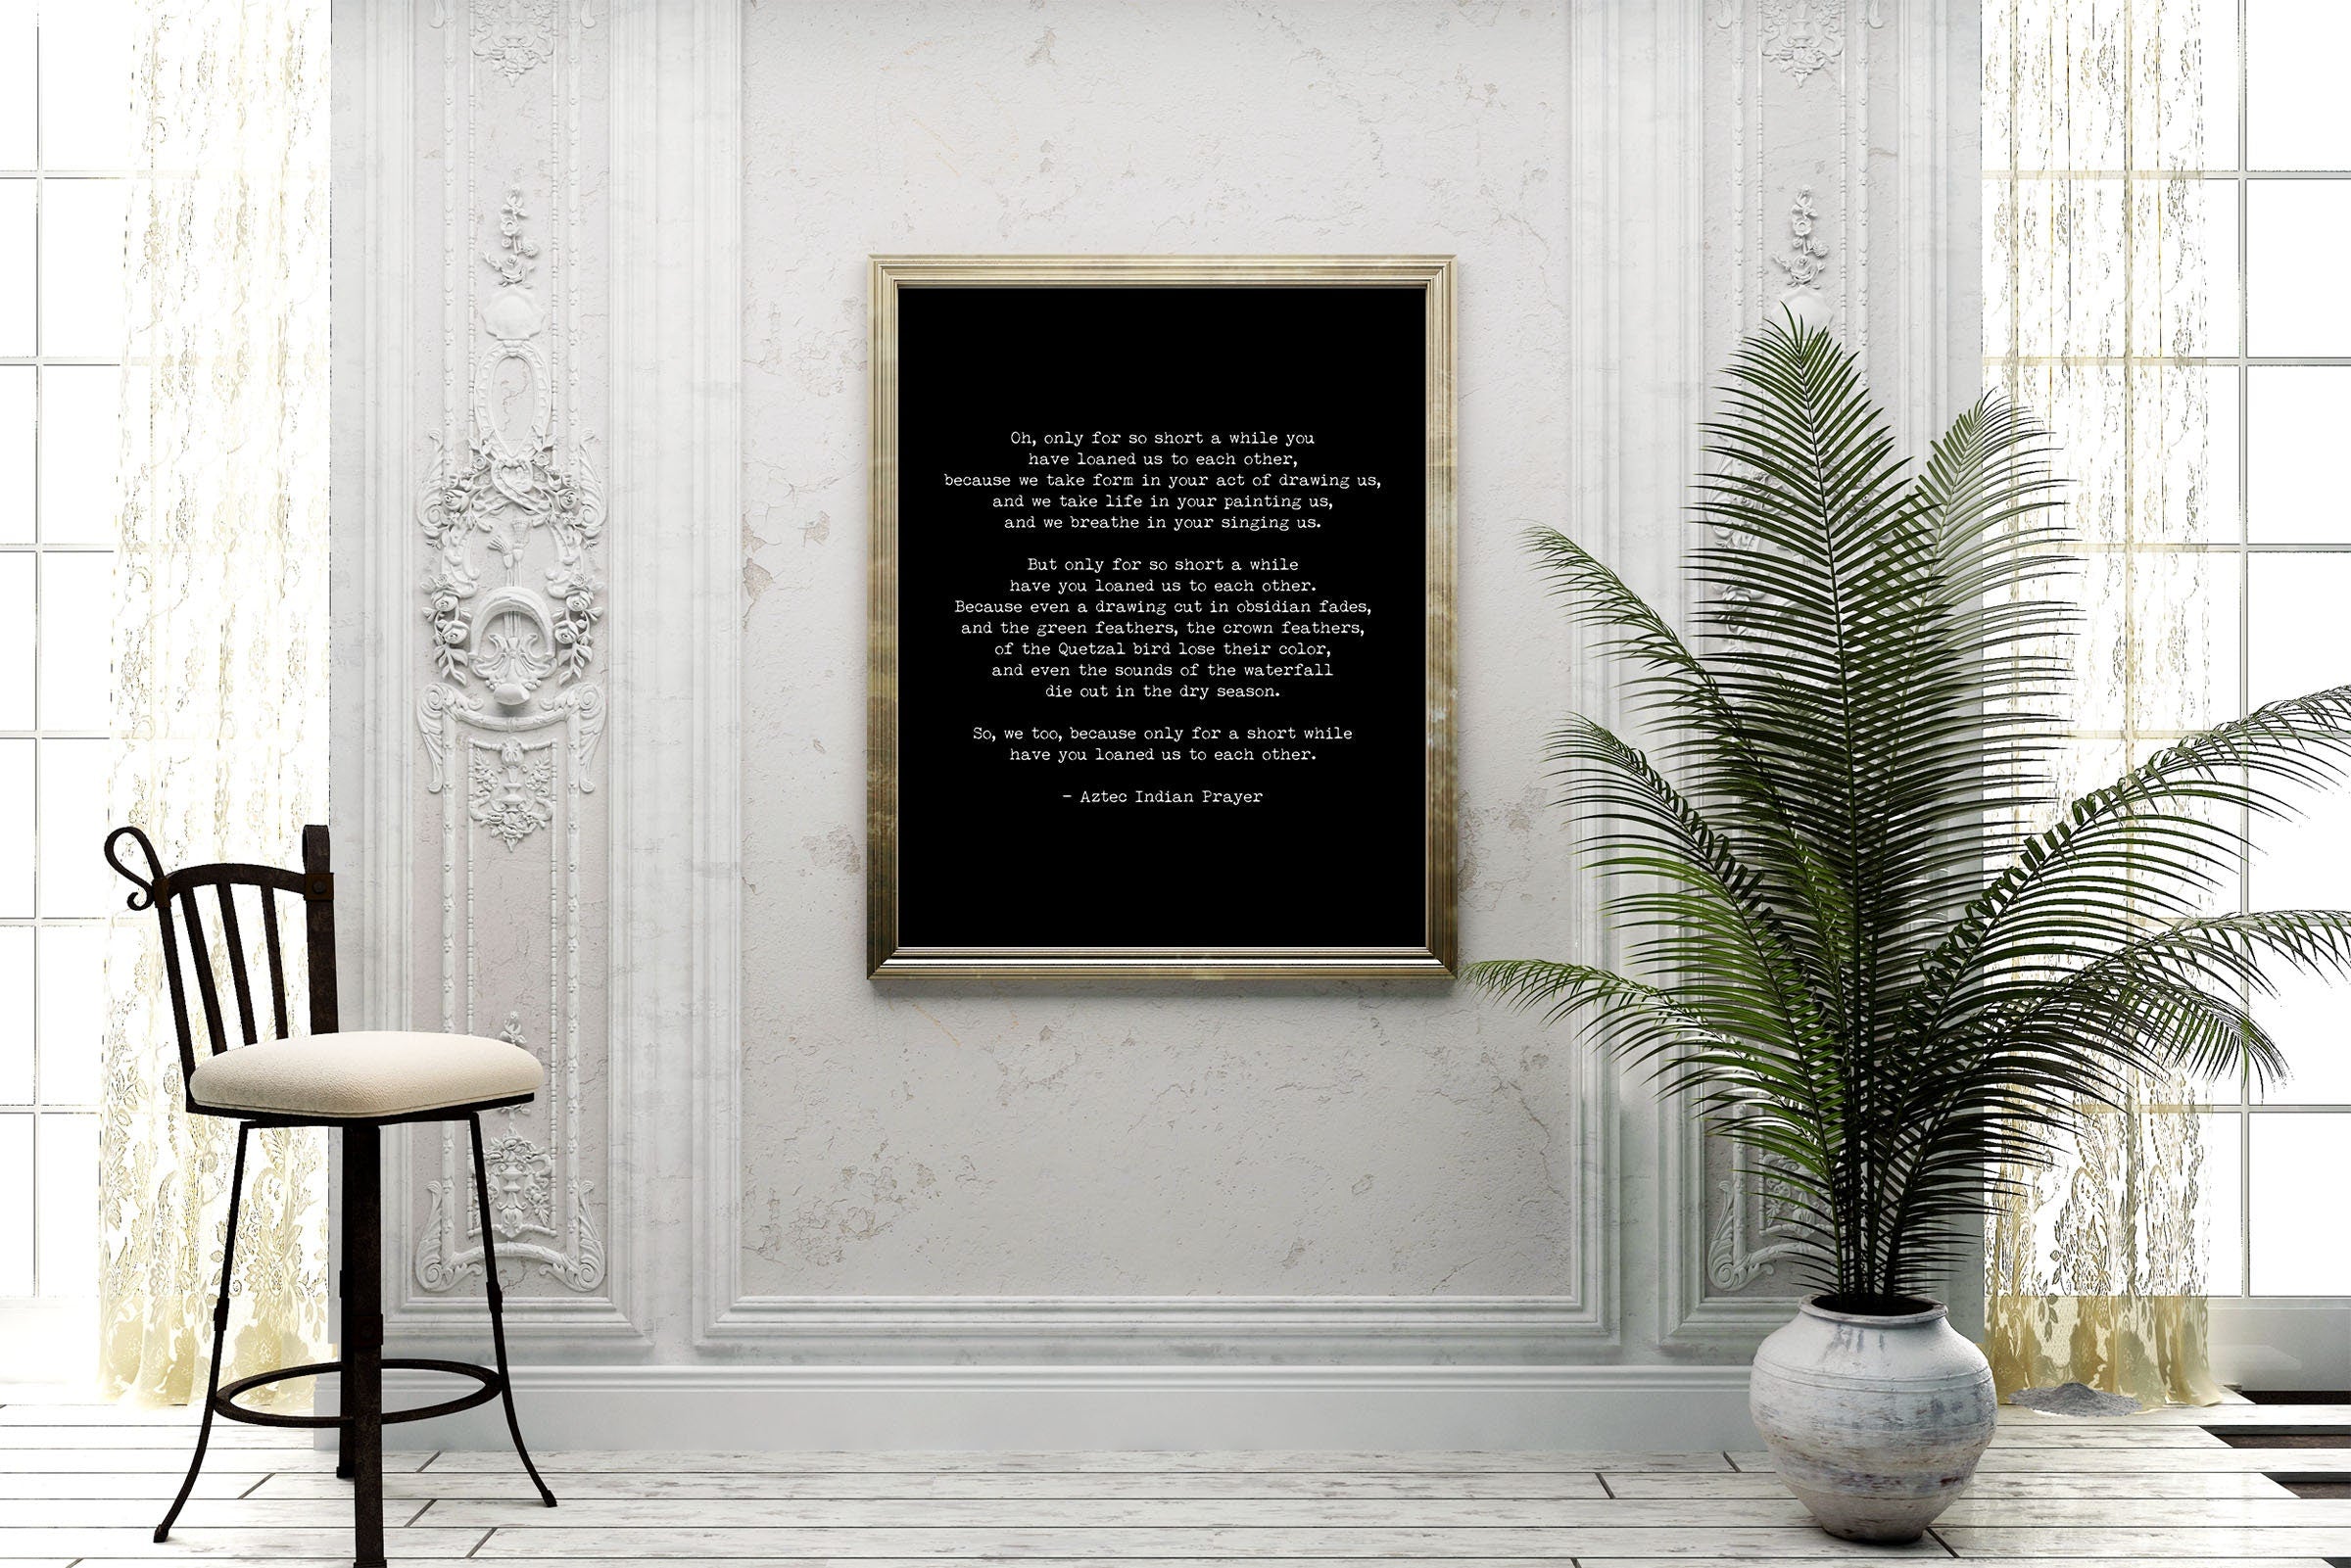 Native American Aztec Prayer Quote Print in Black & White, Oh Only For So Short A While Inspirational Gift Wall Art Print